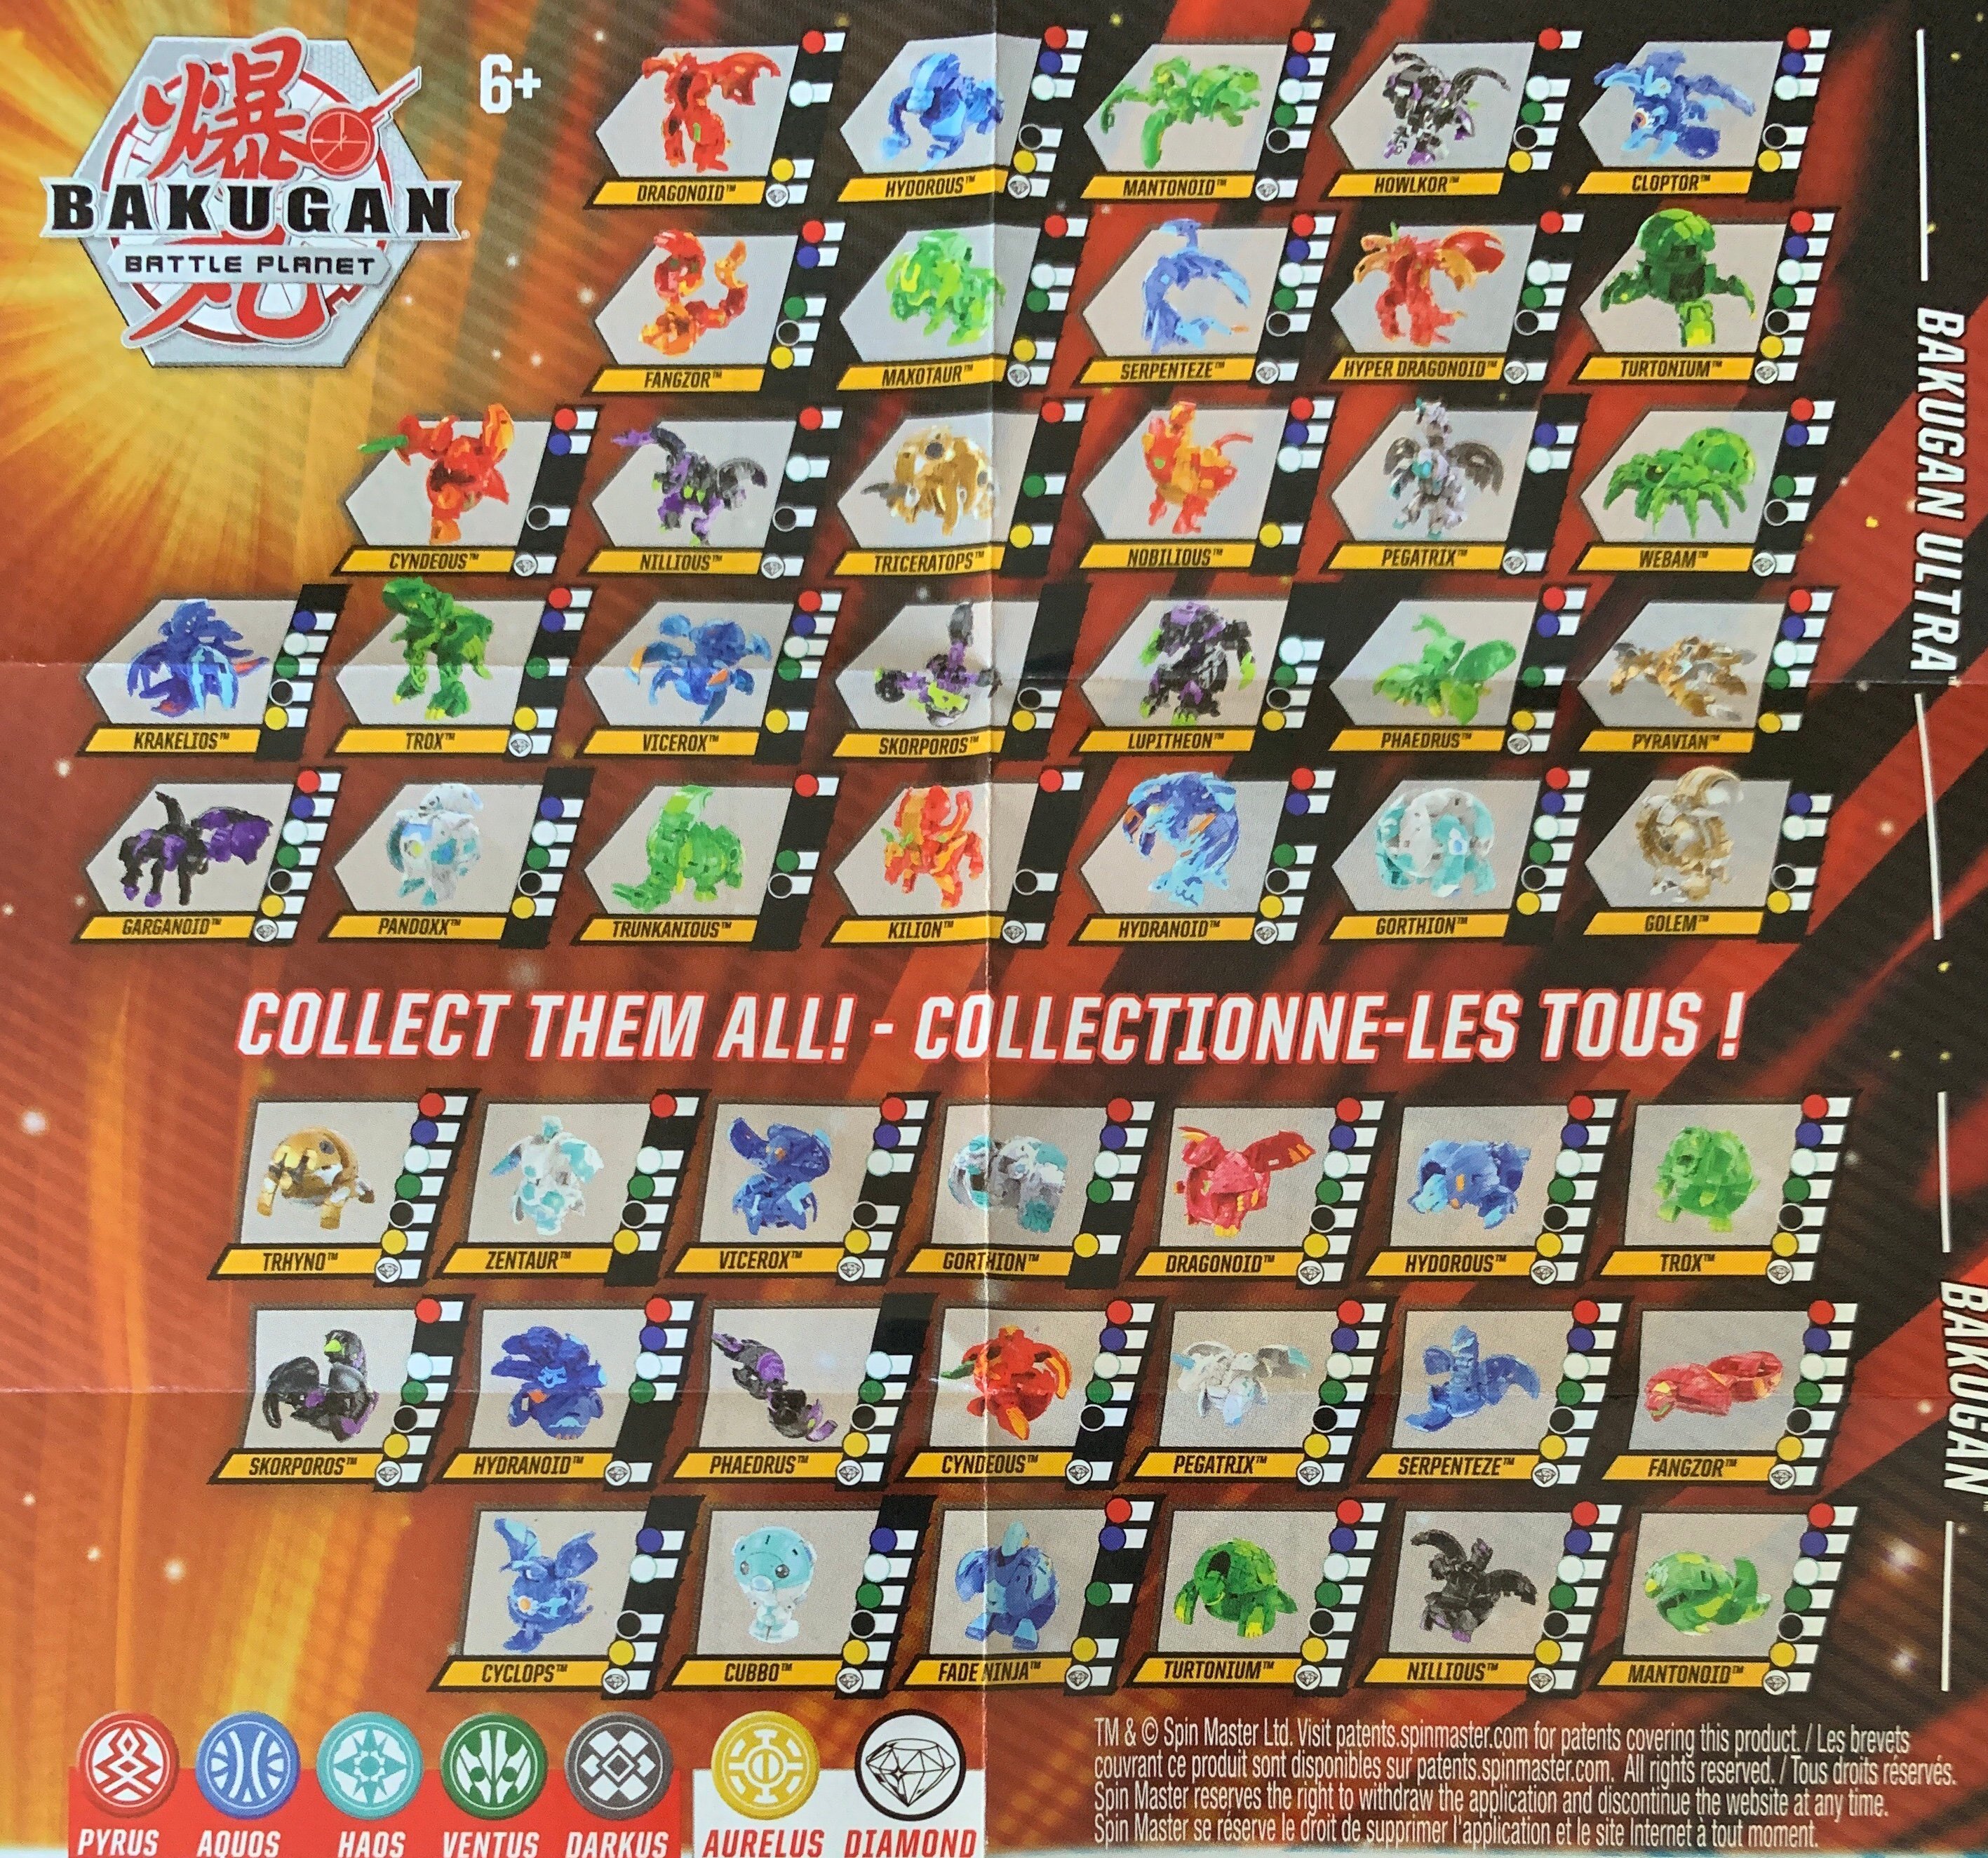 killing klassisk klippe Bakugan Wiki on Twitter: "A new #Bakugan checklist means new Bakugan, of  course! A recently acquired checklist shows several new variations of  existing Bakugan, as well as three new models we haven't